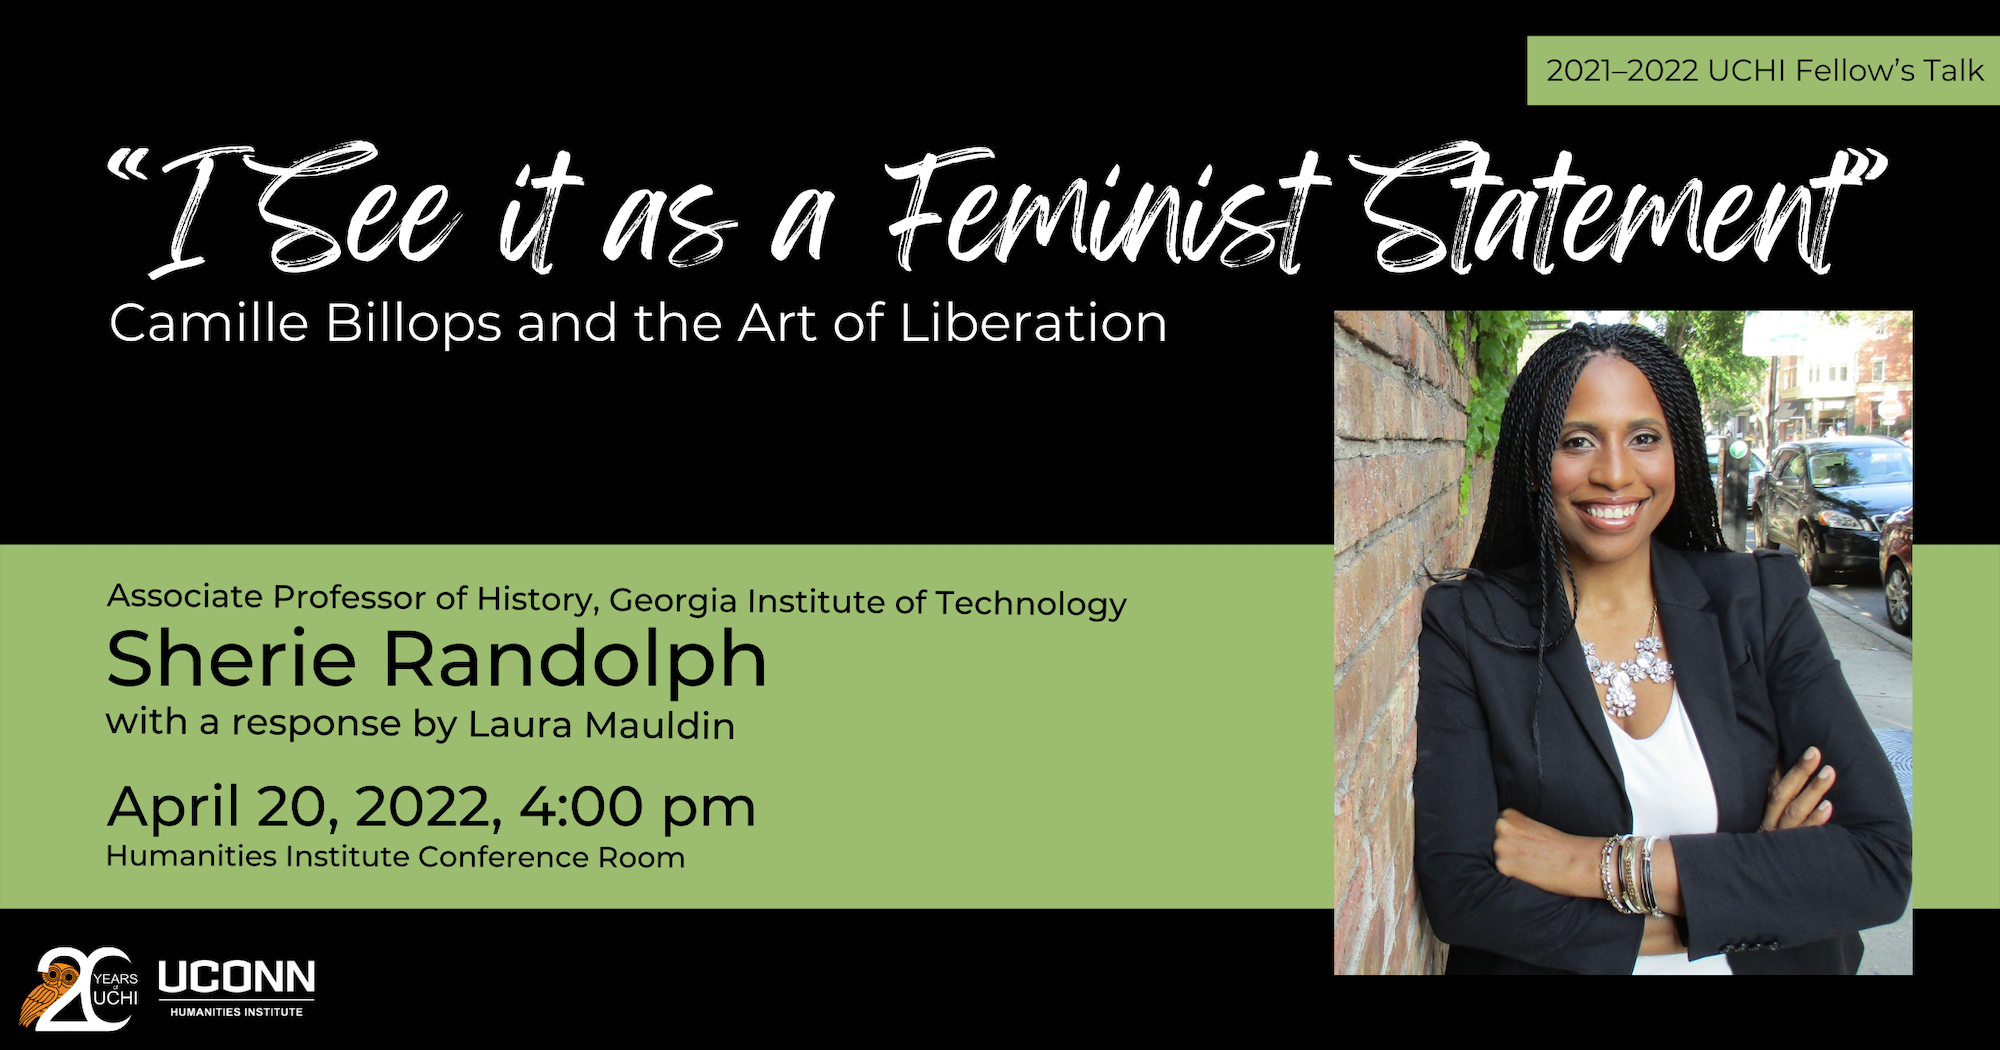 "I See it as a Feminist Statement": Camille Billops and the Art of Liberation. Associate Professor of History, Georgia Institute of Technology. Sherie Randolph. With a response by Laura Mauldin. April 20, 2022, 4:00pm. Humanities Institute Conference Room